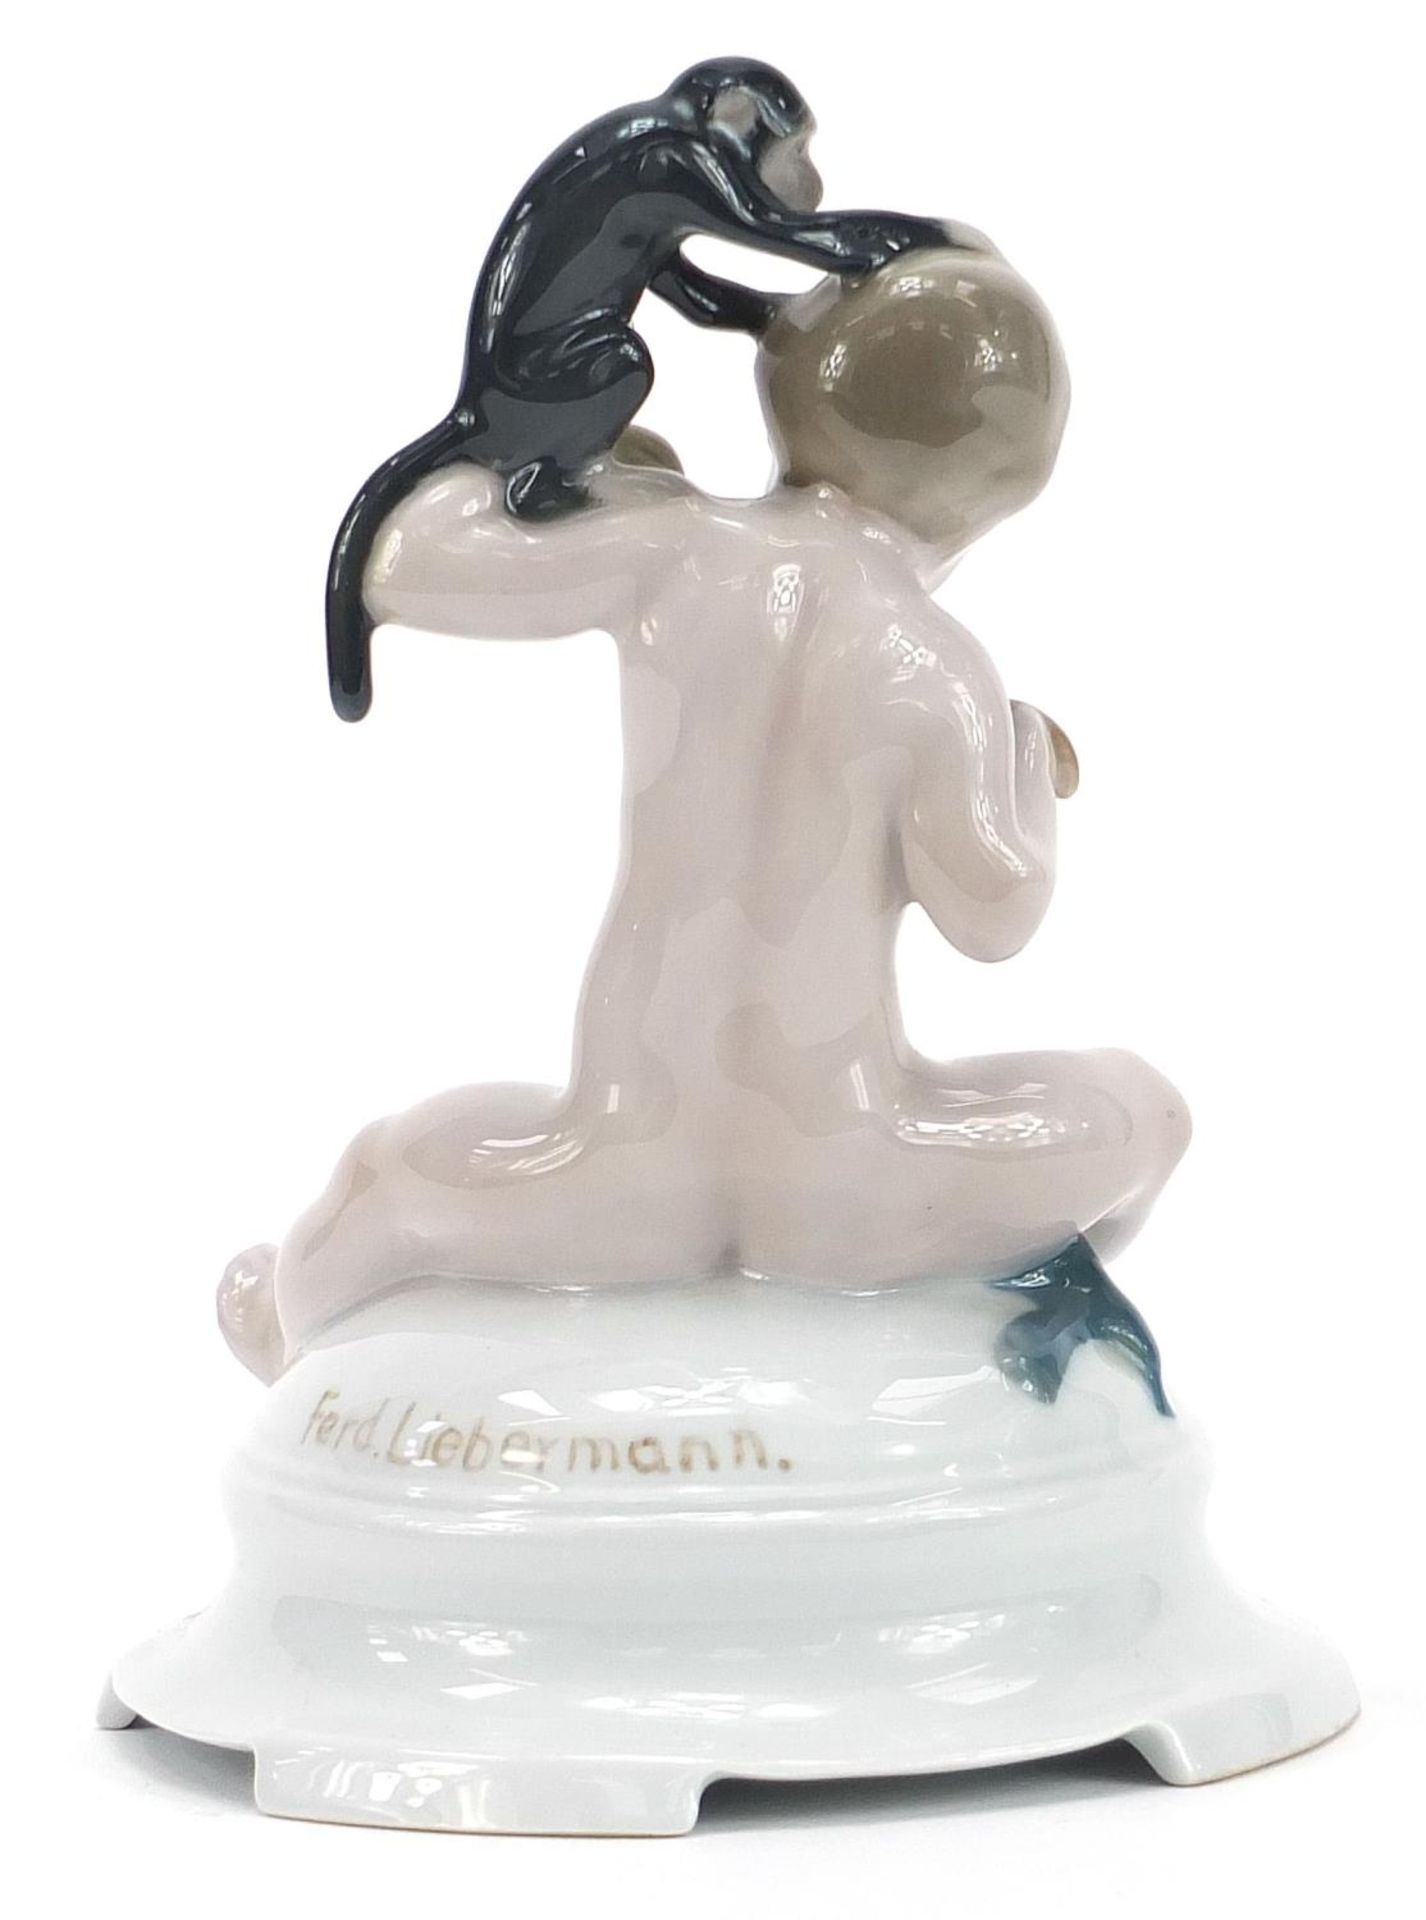 Ferdinand Liebermann for Rosenthal, porcelain figure of a young boy feeding a monkey, 17cm high :For - Image 2 of 5